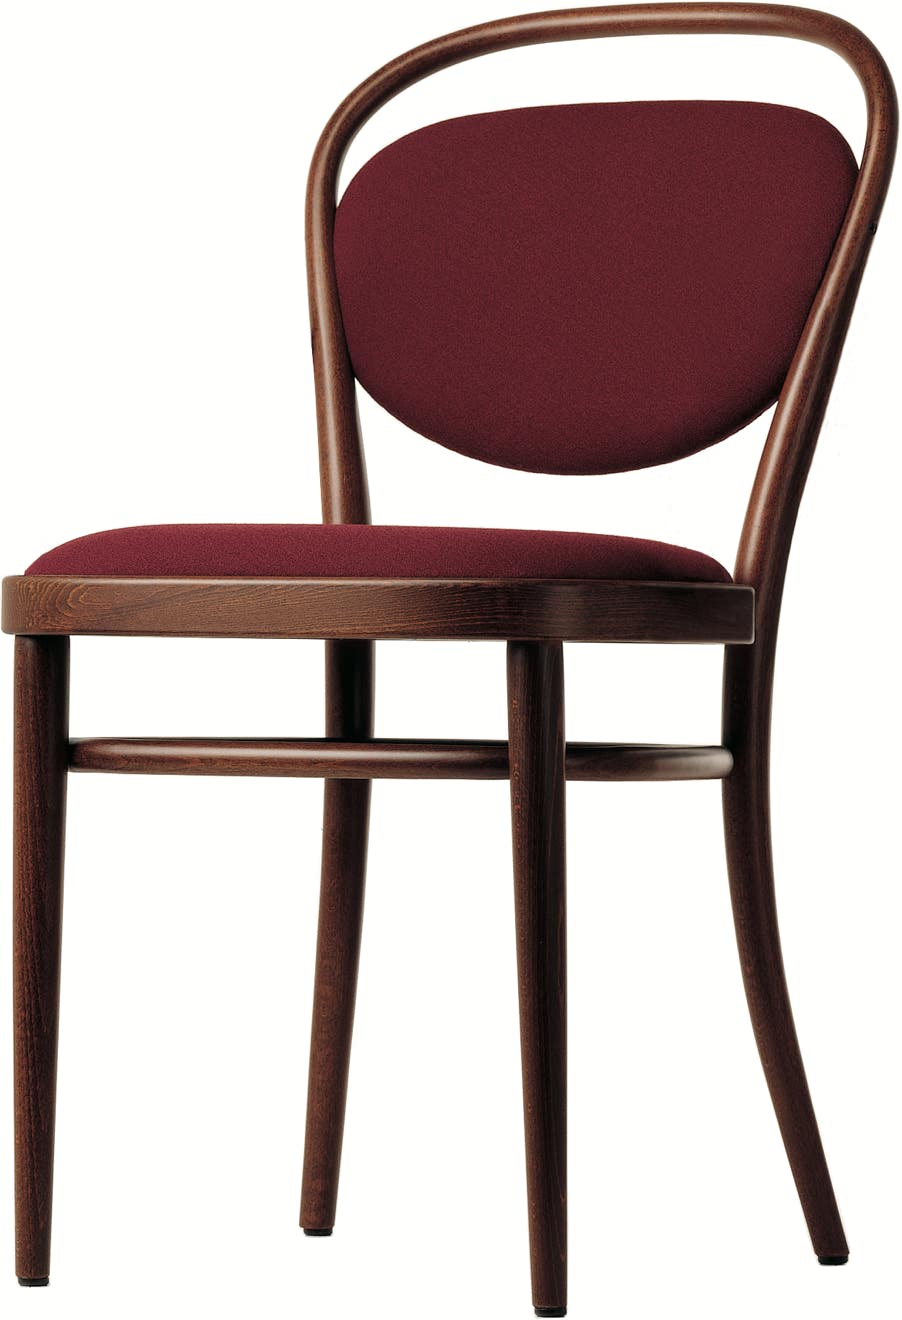 215 P Chair (upholstered seat and back)